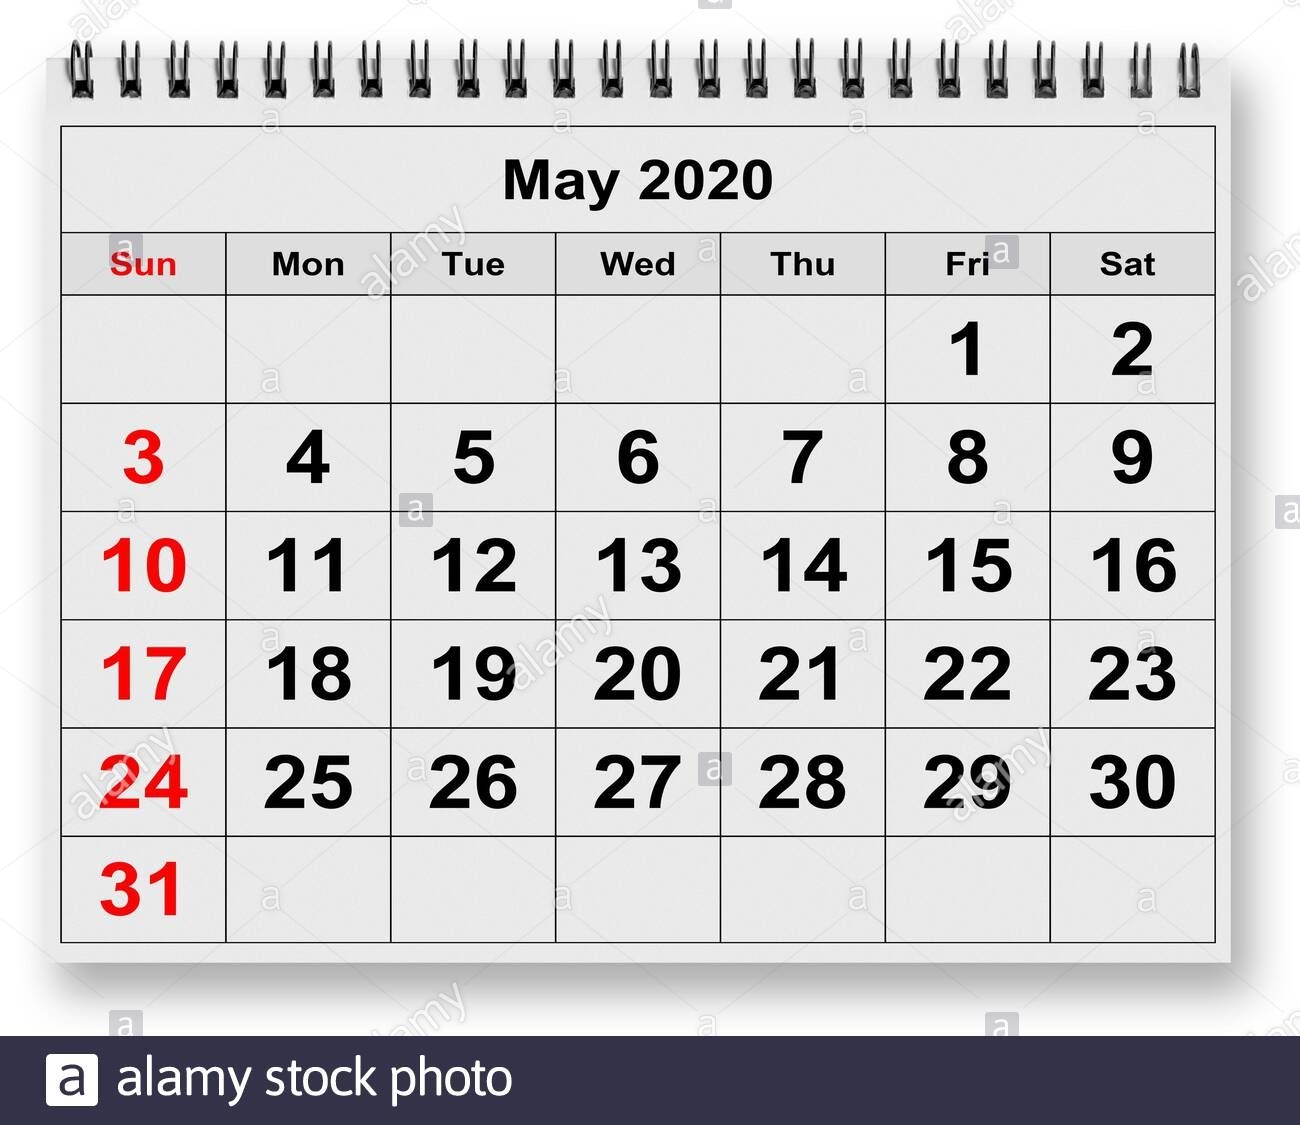 one page of the annual monthly calendar month may 2020